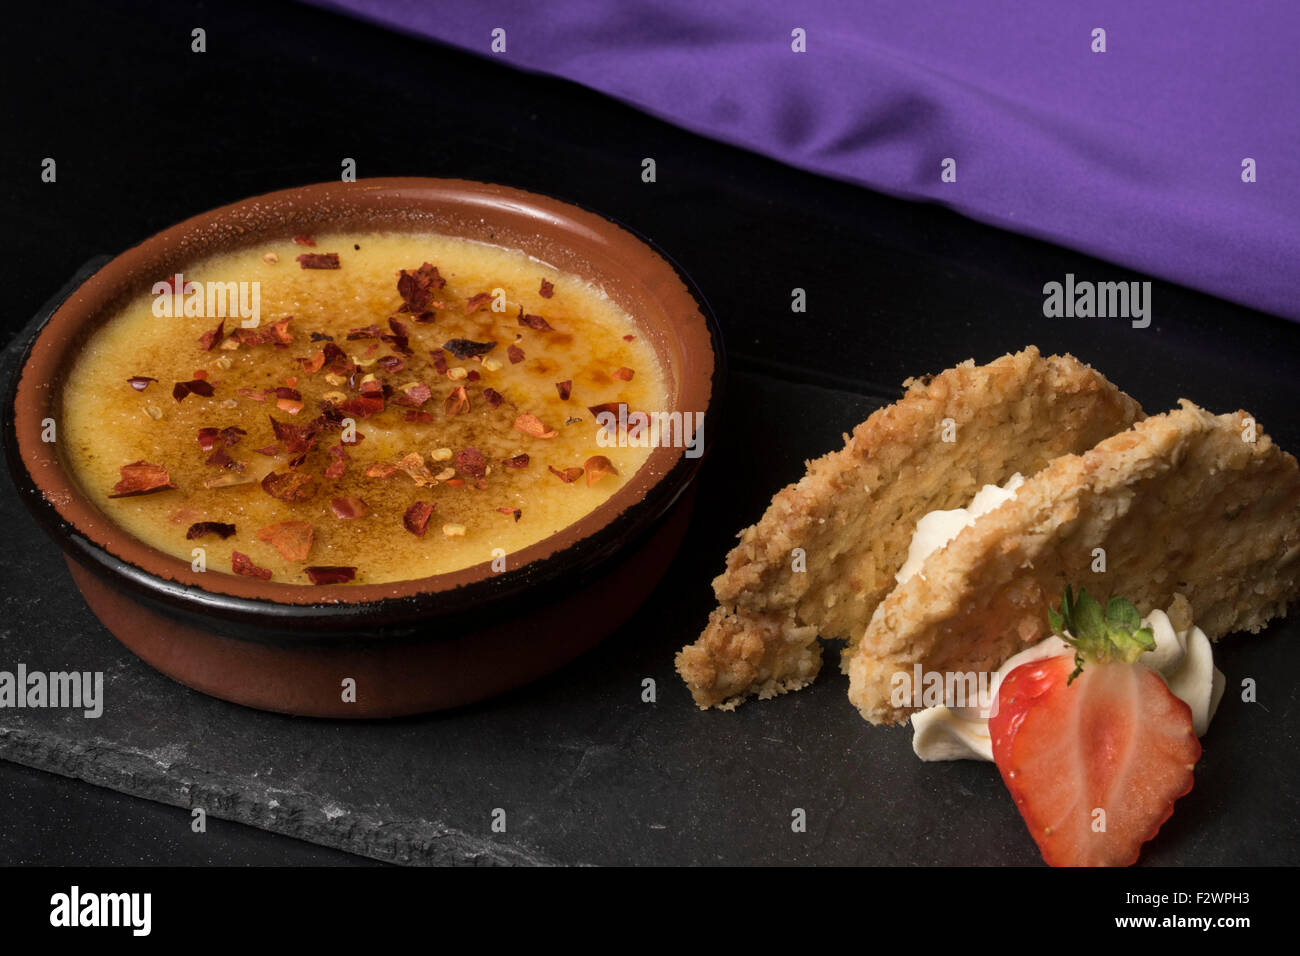 Creme brulee dessert dish served with chilli flakes. Stock Photo